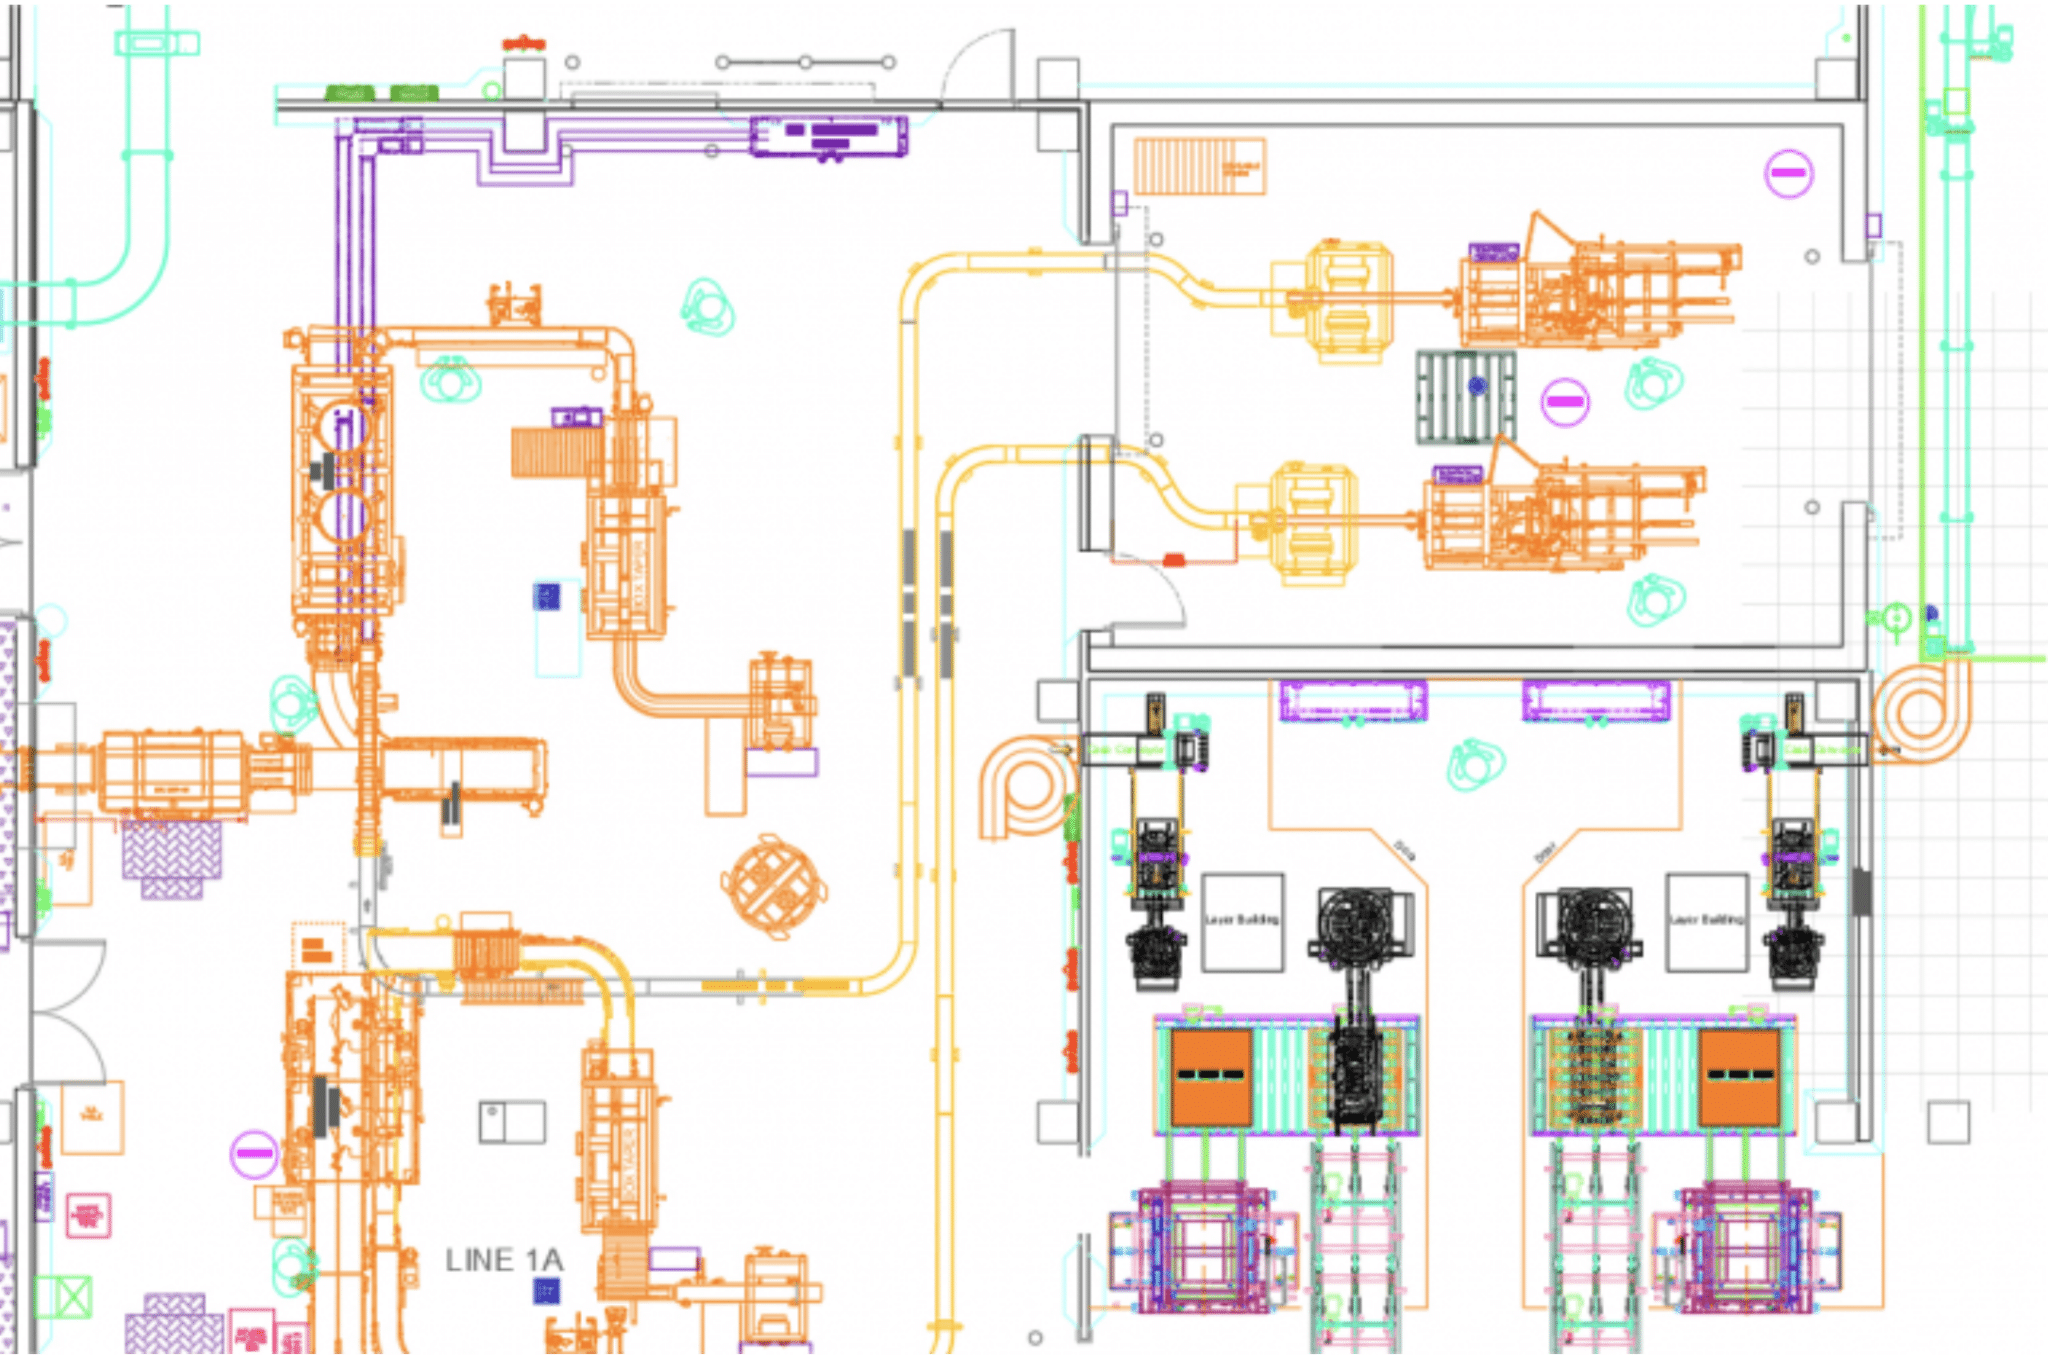 Colorful layout design plans for an industry building identifying doors, pipes, and other machinery.